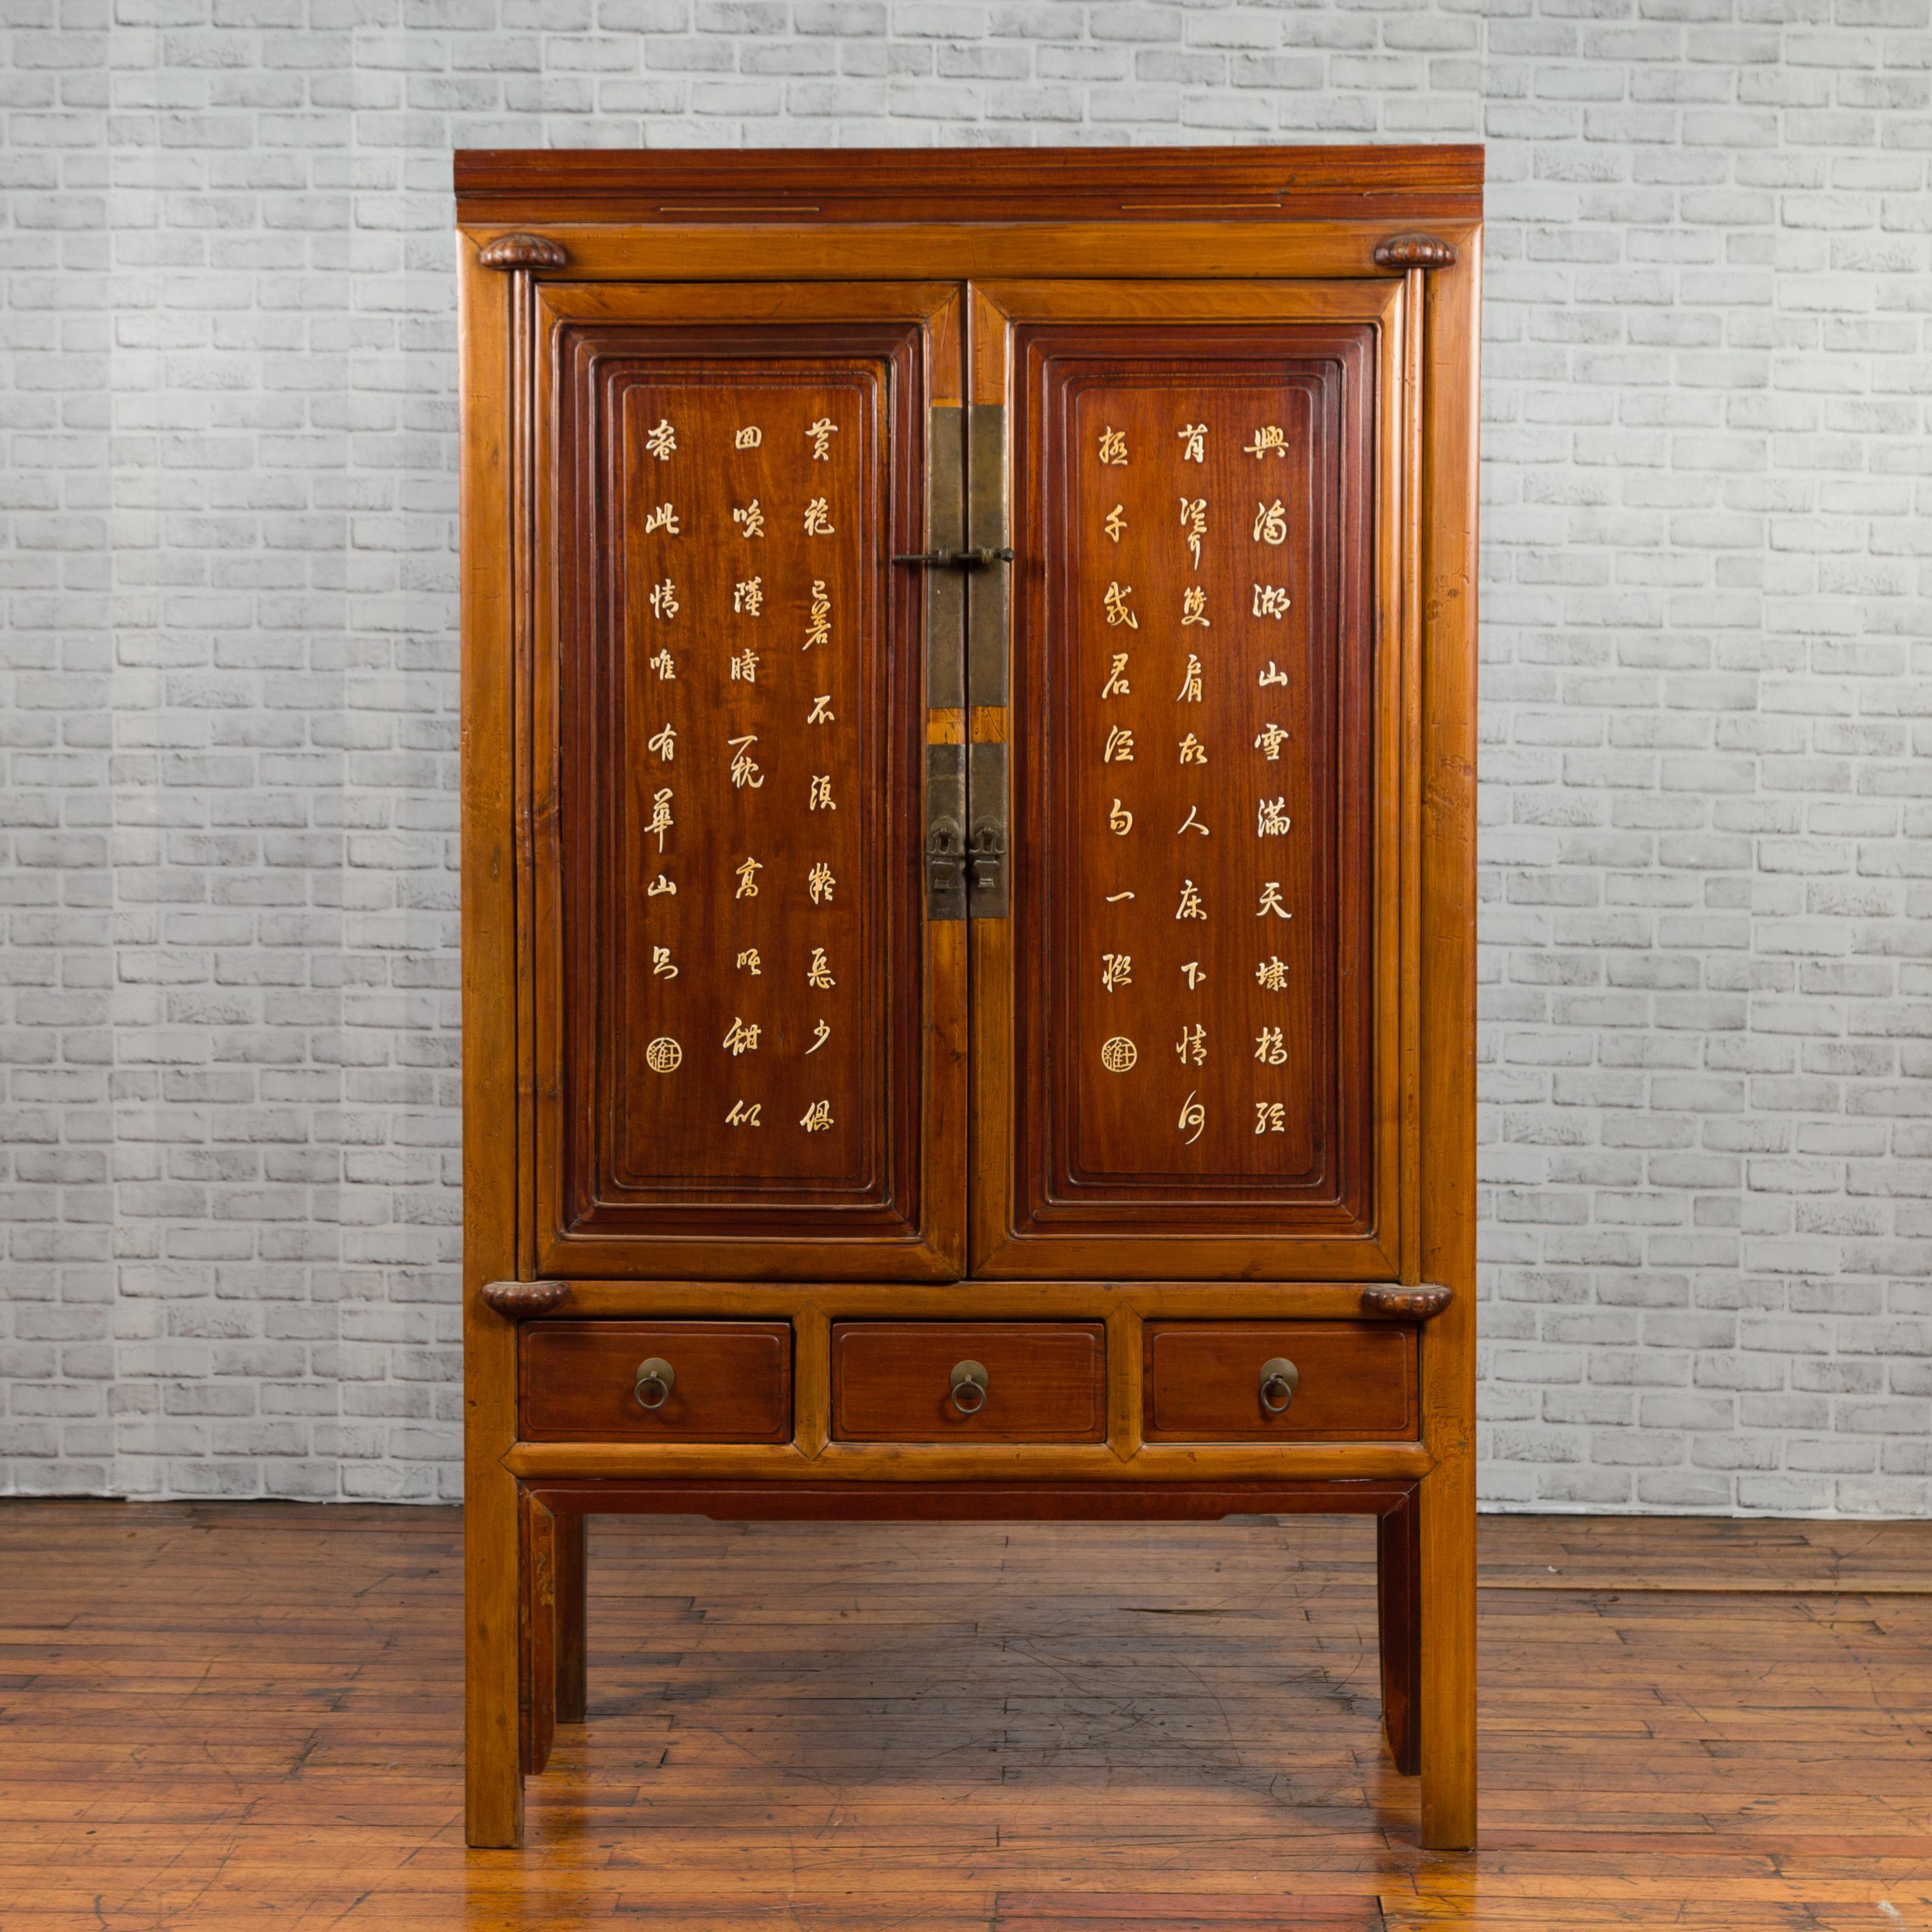 A Chinese antique cabinet from the 20th century, with inlaid calligraphy motifs, inner shelves and drawers. Created in China during the 20th century, this antique cabinet features an elegant two-toned façade adorned with golden inlaid calligraphy